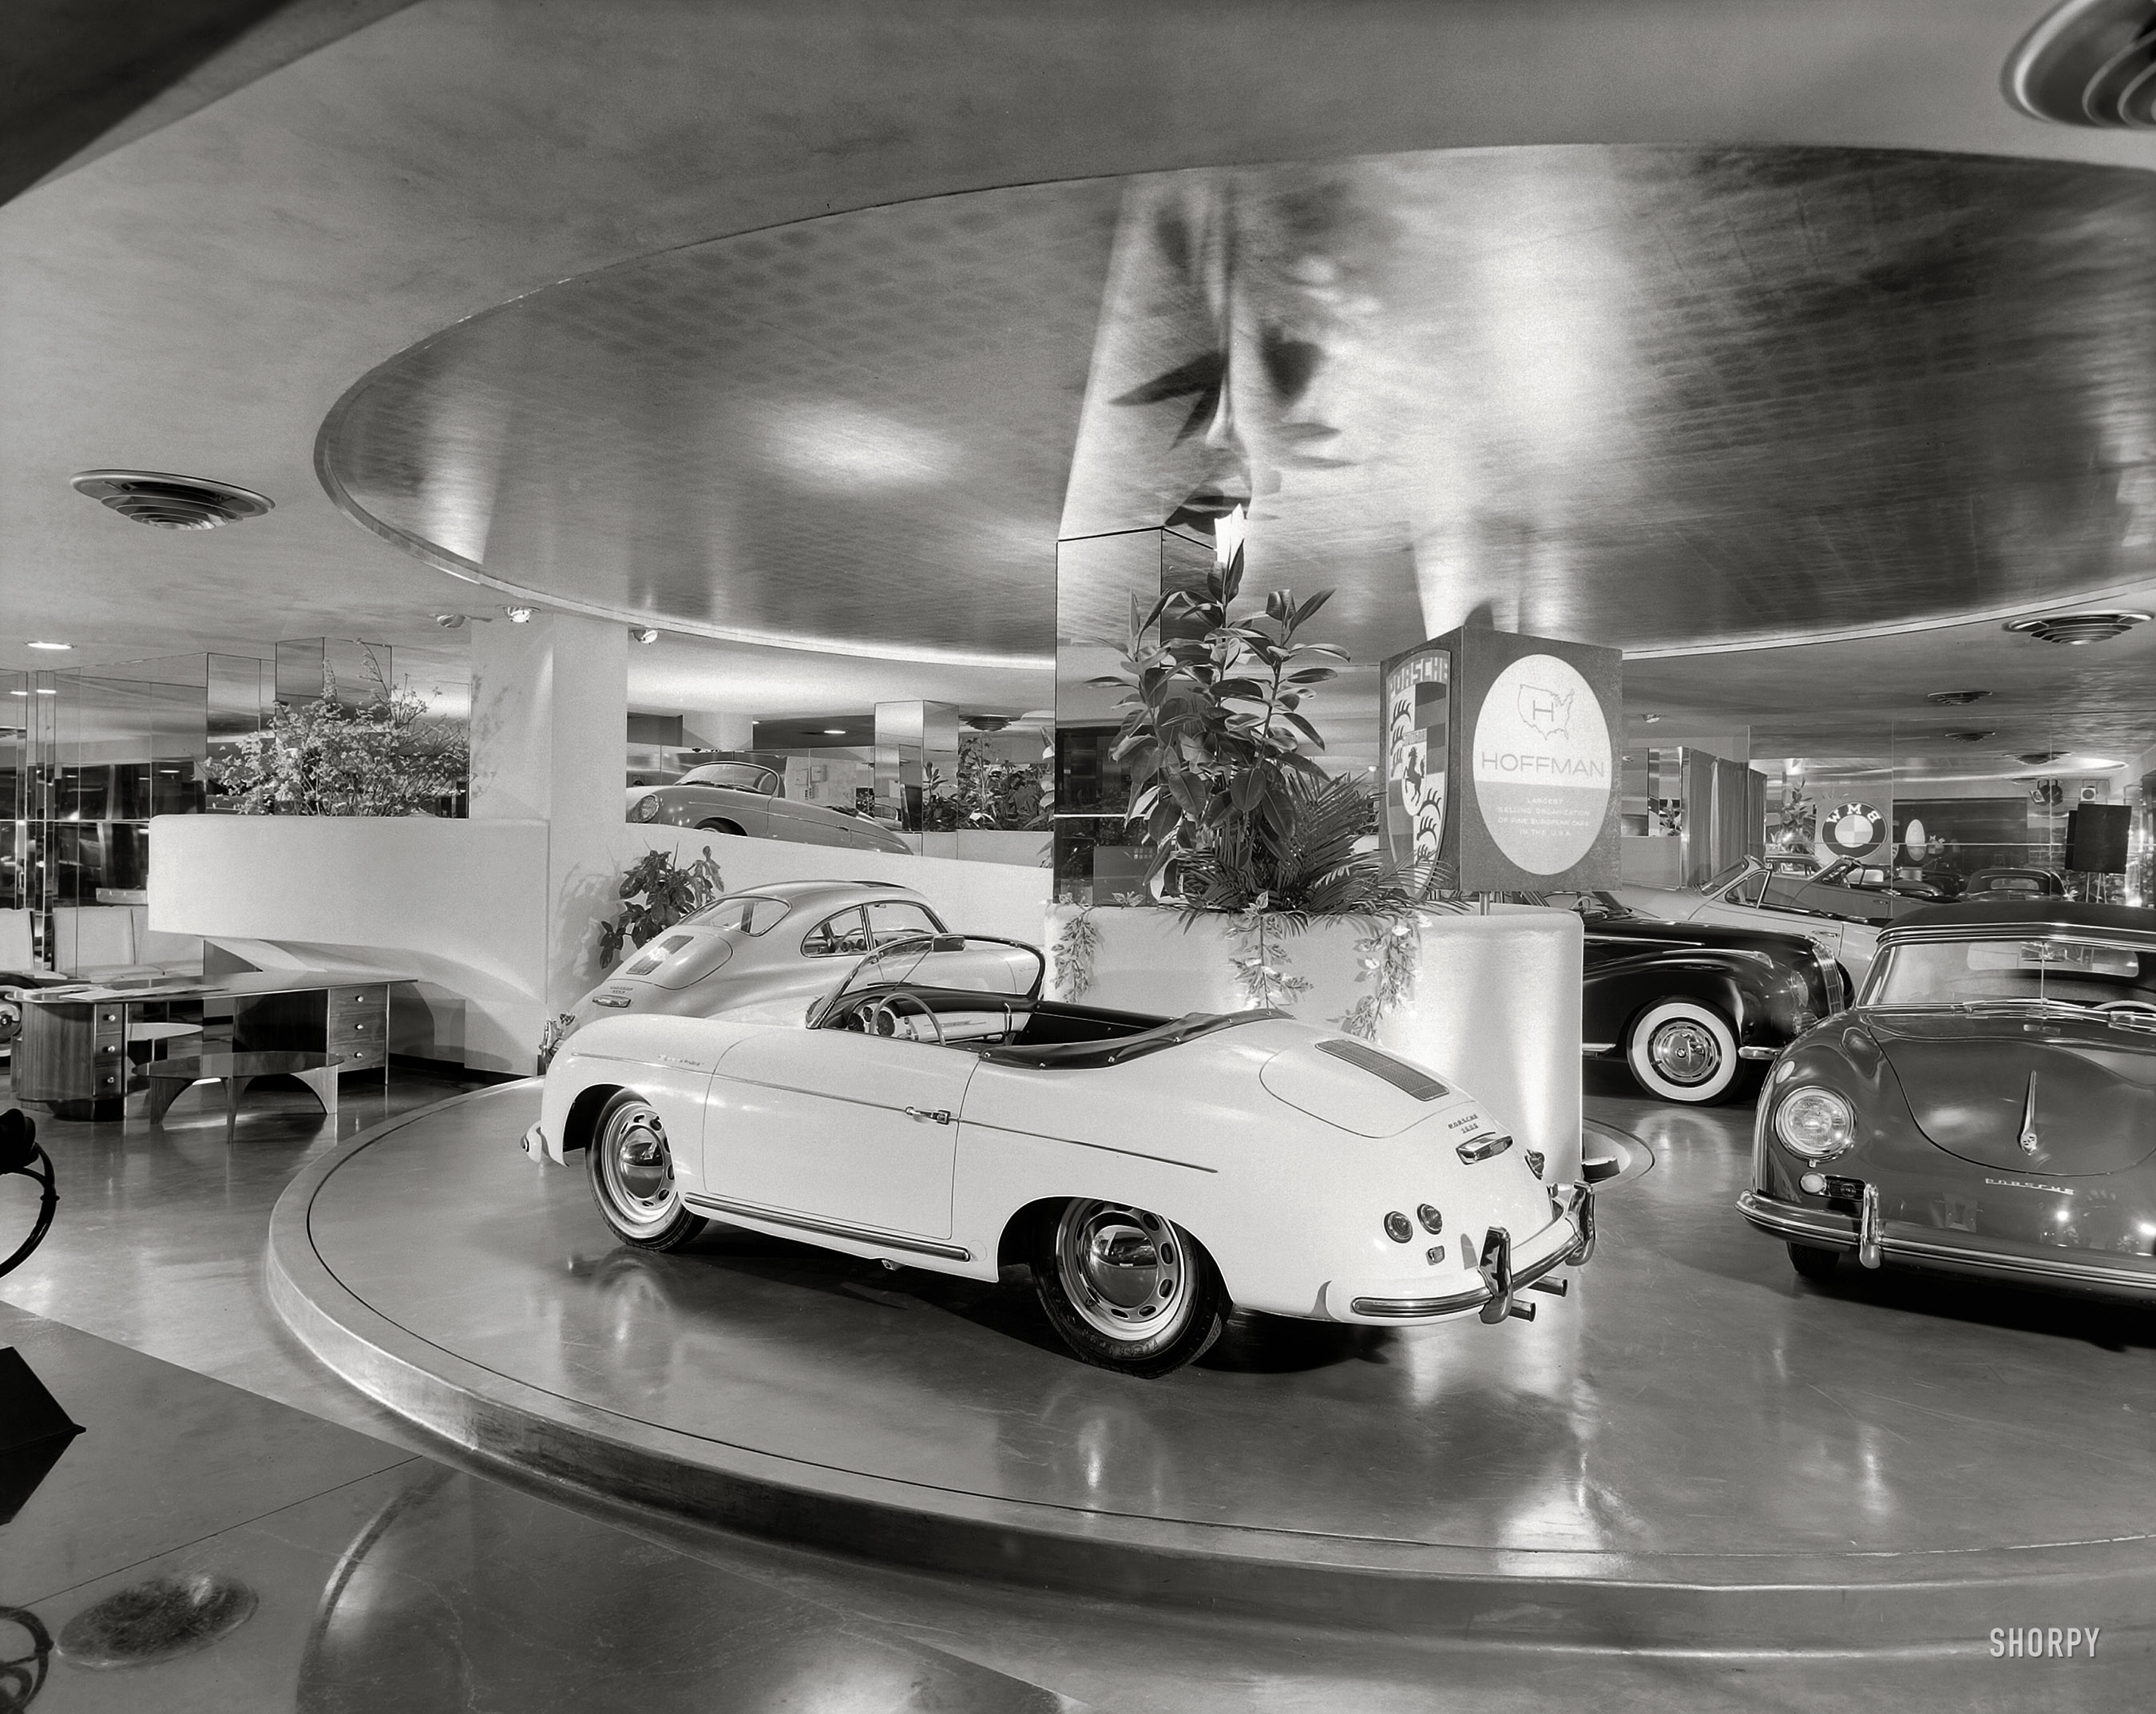 New York circa 1955. The Max Hoffman car showroom, with its motorized turntable, at 430 Park Avenue and 56th Street. Designed by Frank Lloyd Wright and recently demolished. Photo by Ezra Stoller. View full size.